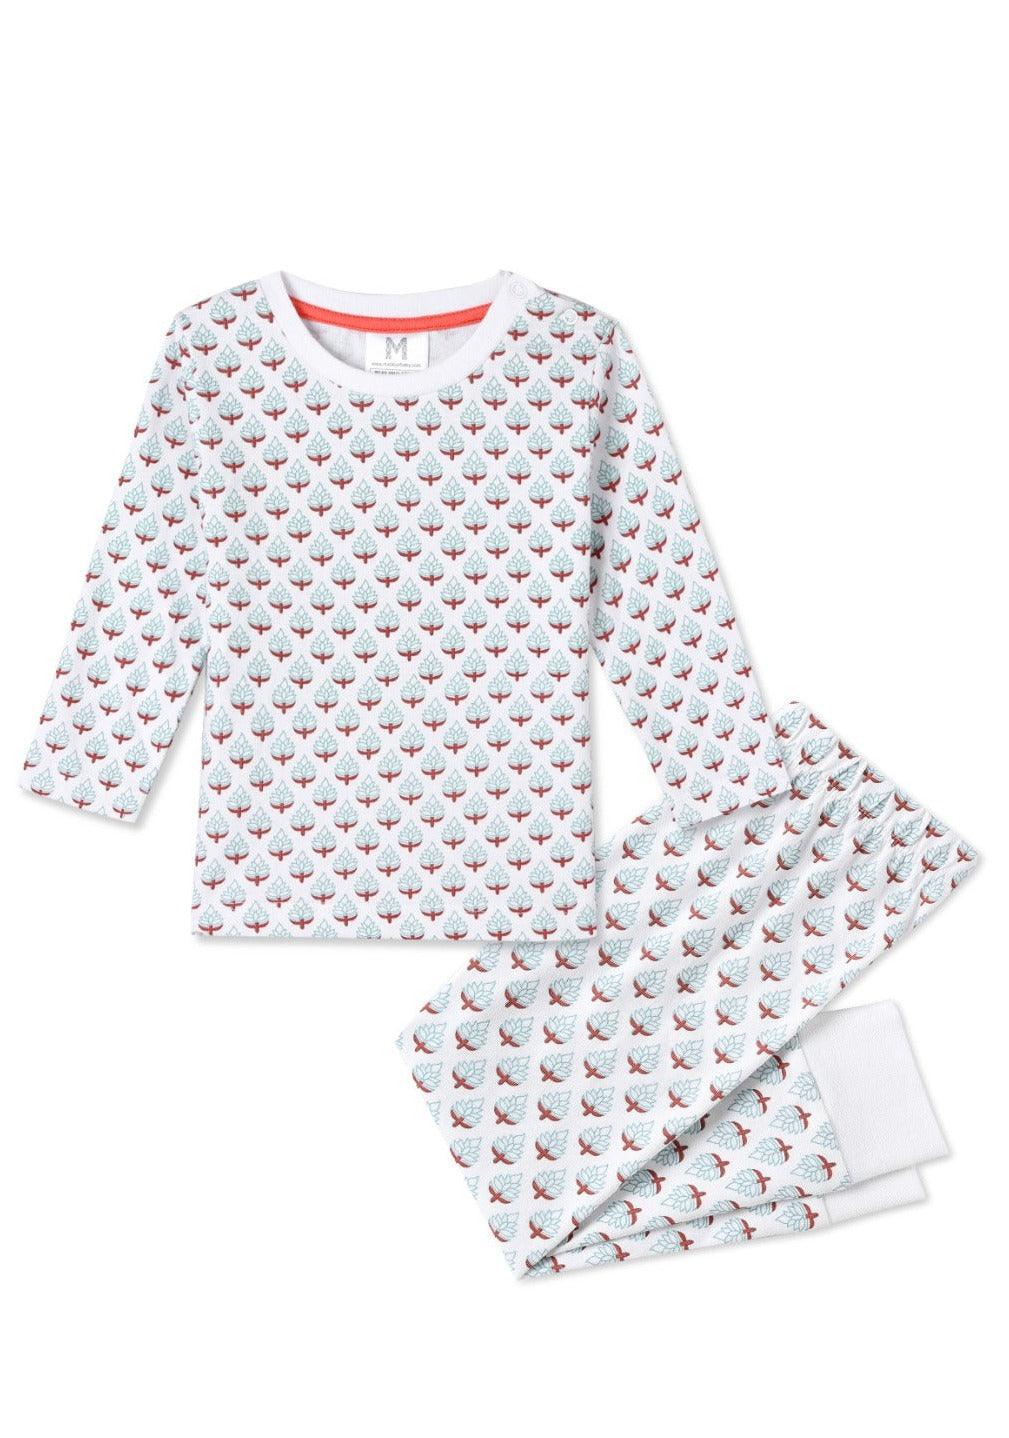 Toddler & Big Kid Cotton Knit PJ Set (Miami) - Why and Whale